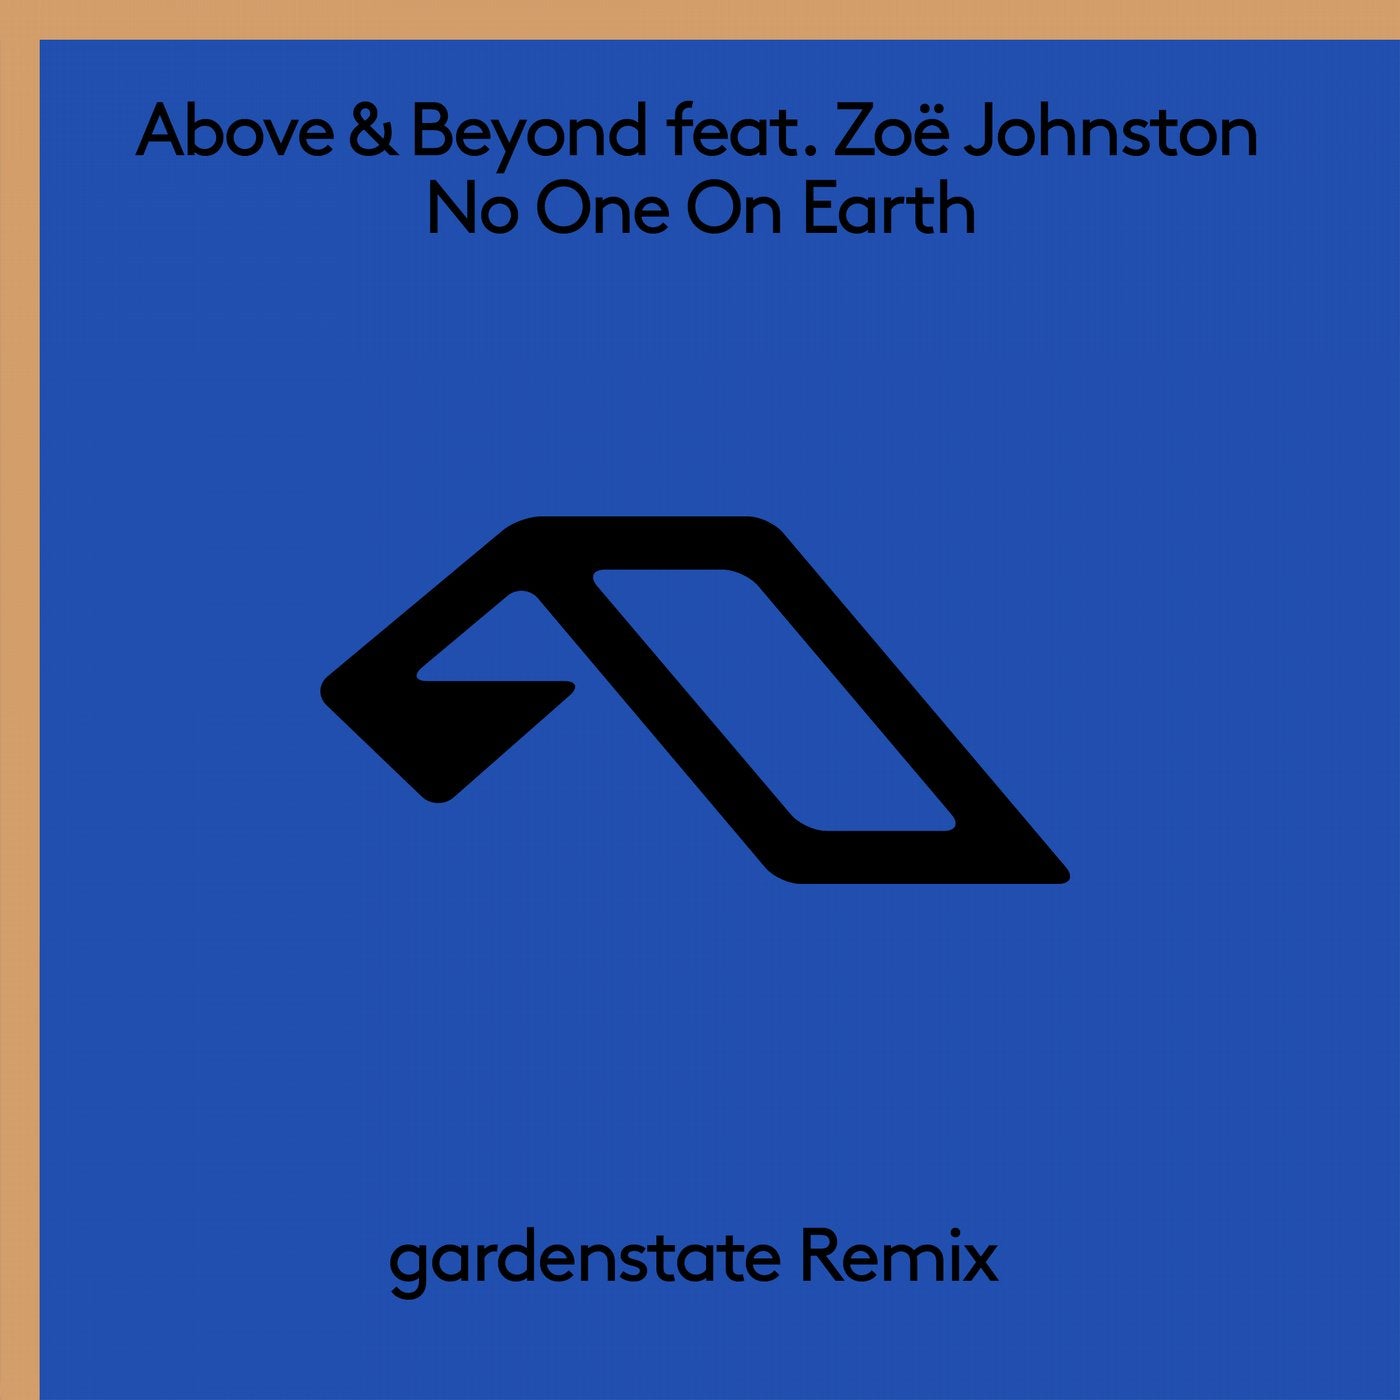 No One On Earth (gardenstate Remix)